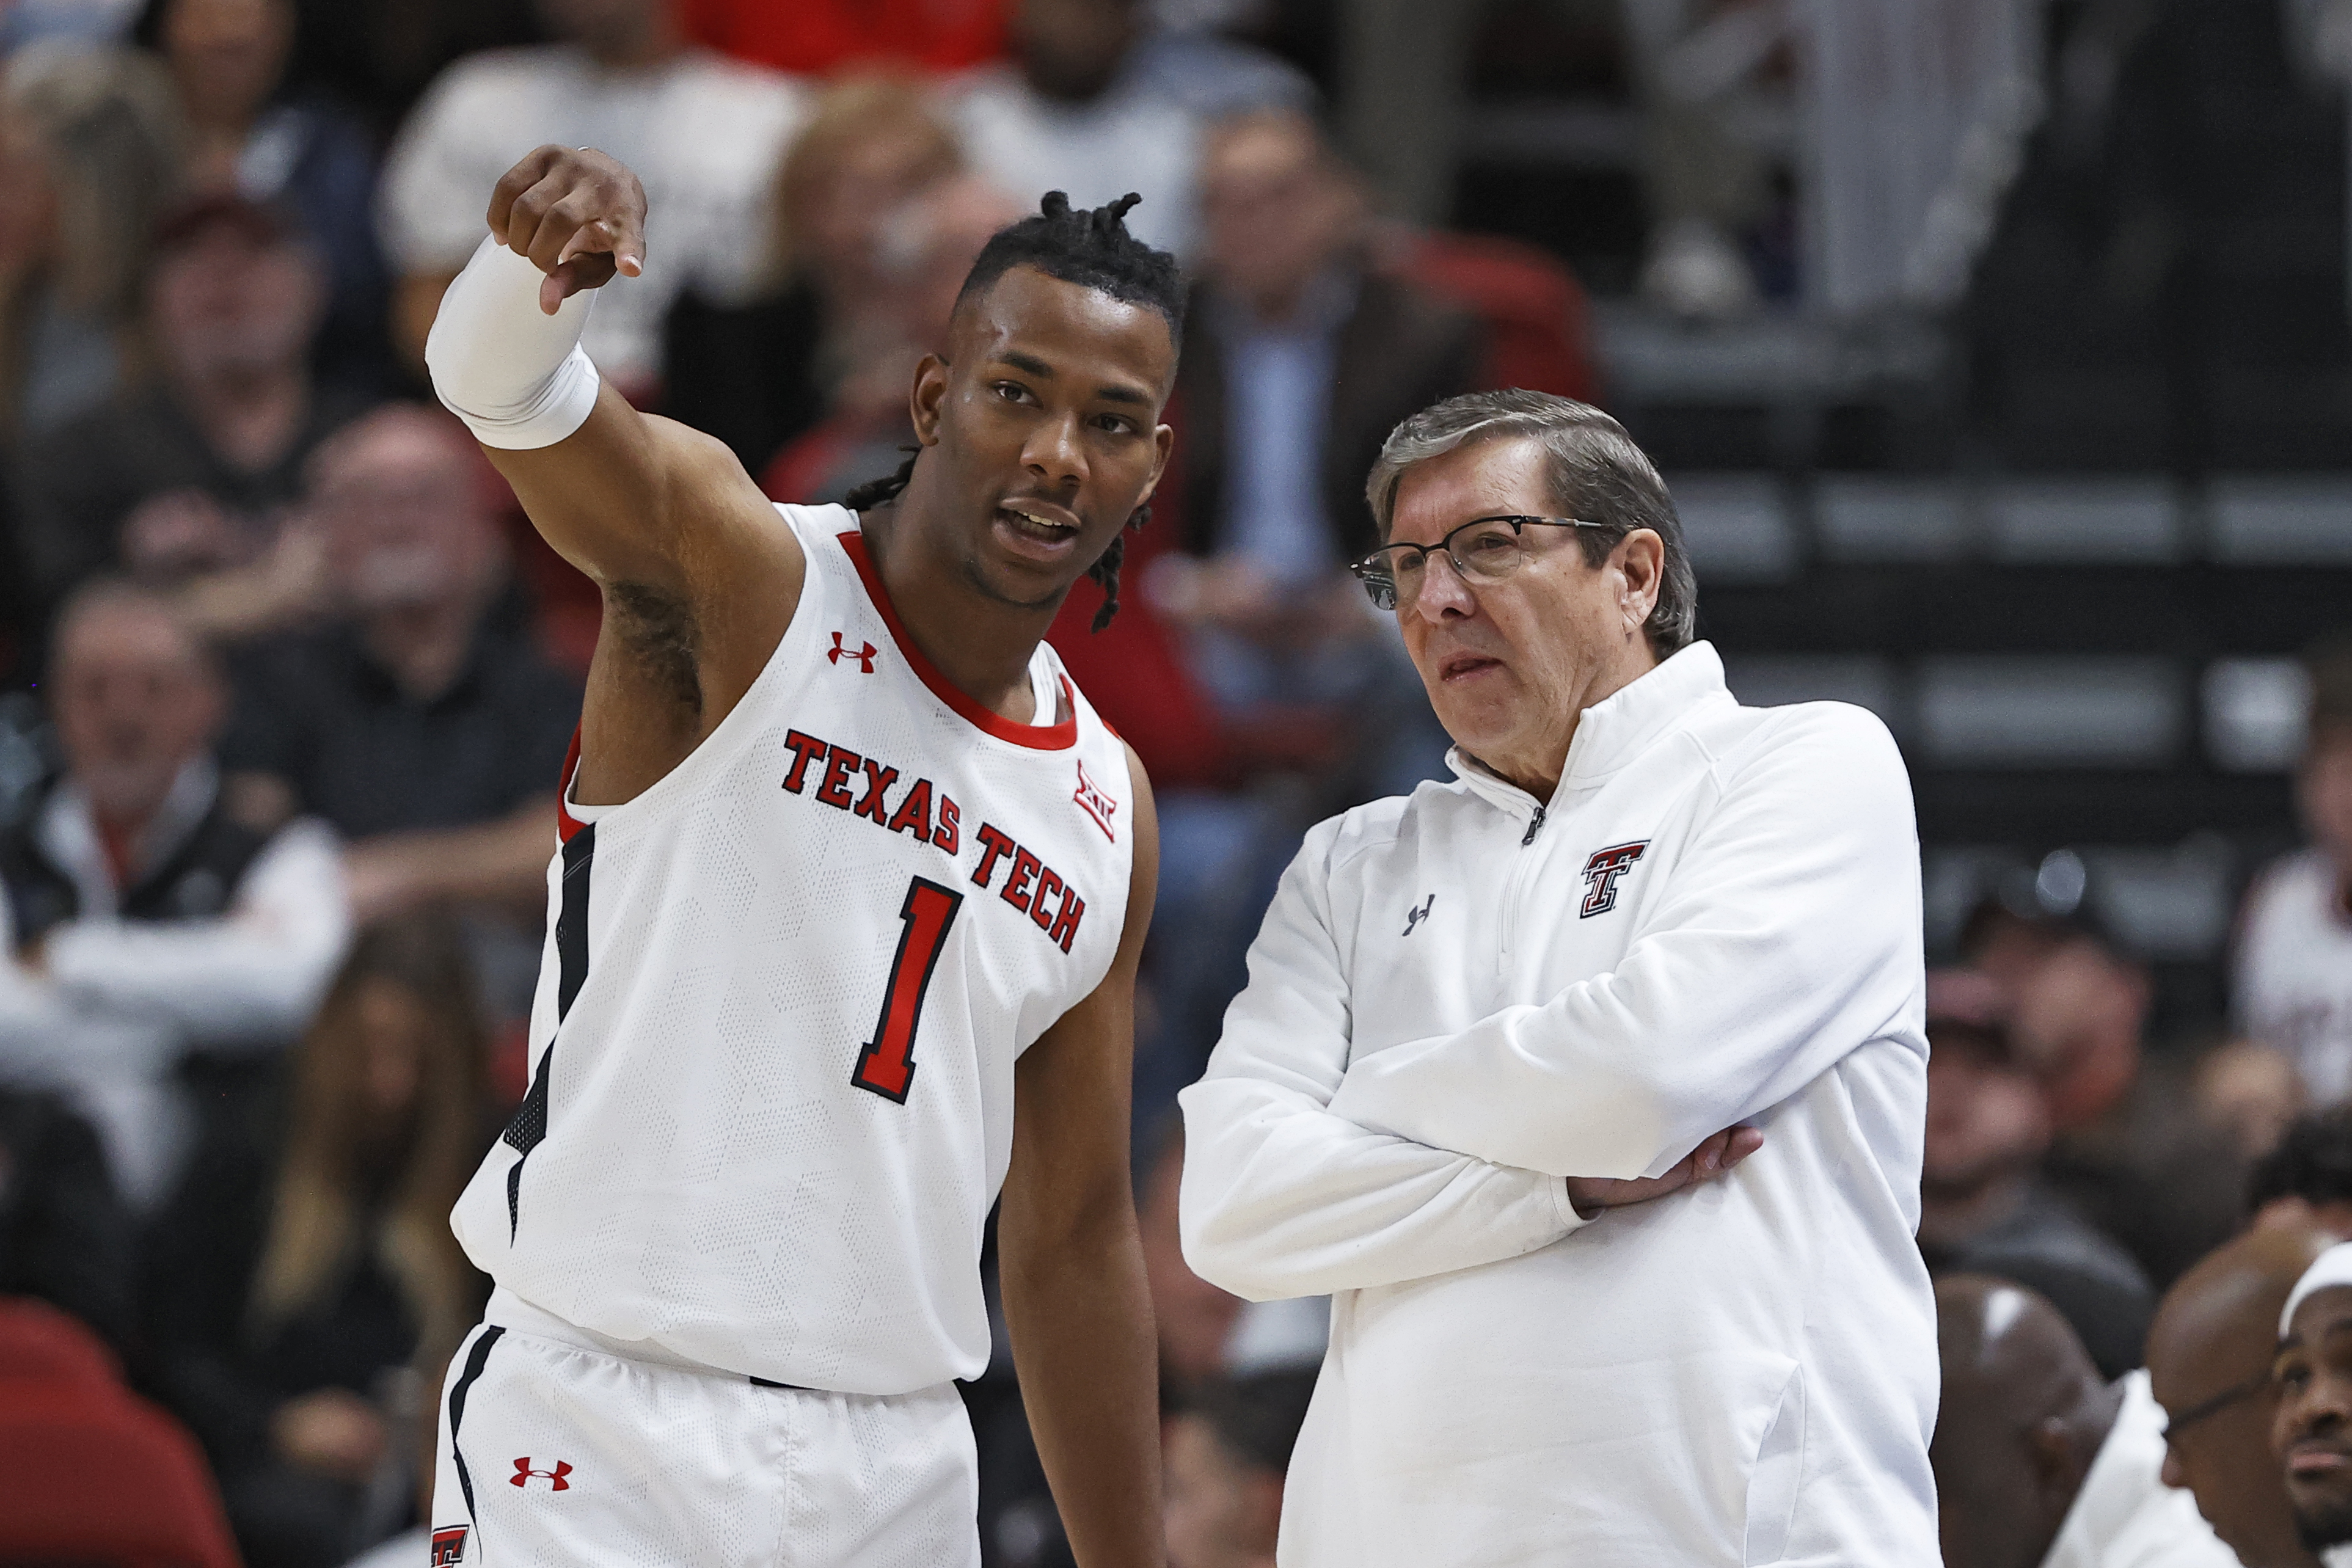 What did Mark Adams say to lead to resignation as Texas Tech men's